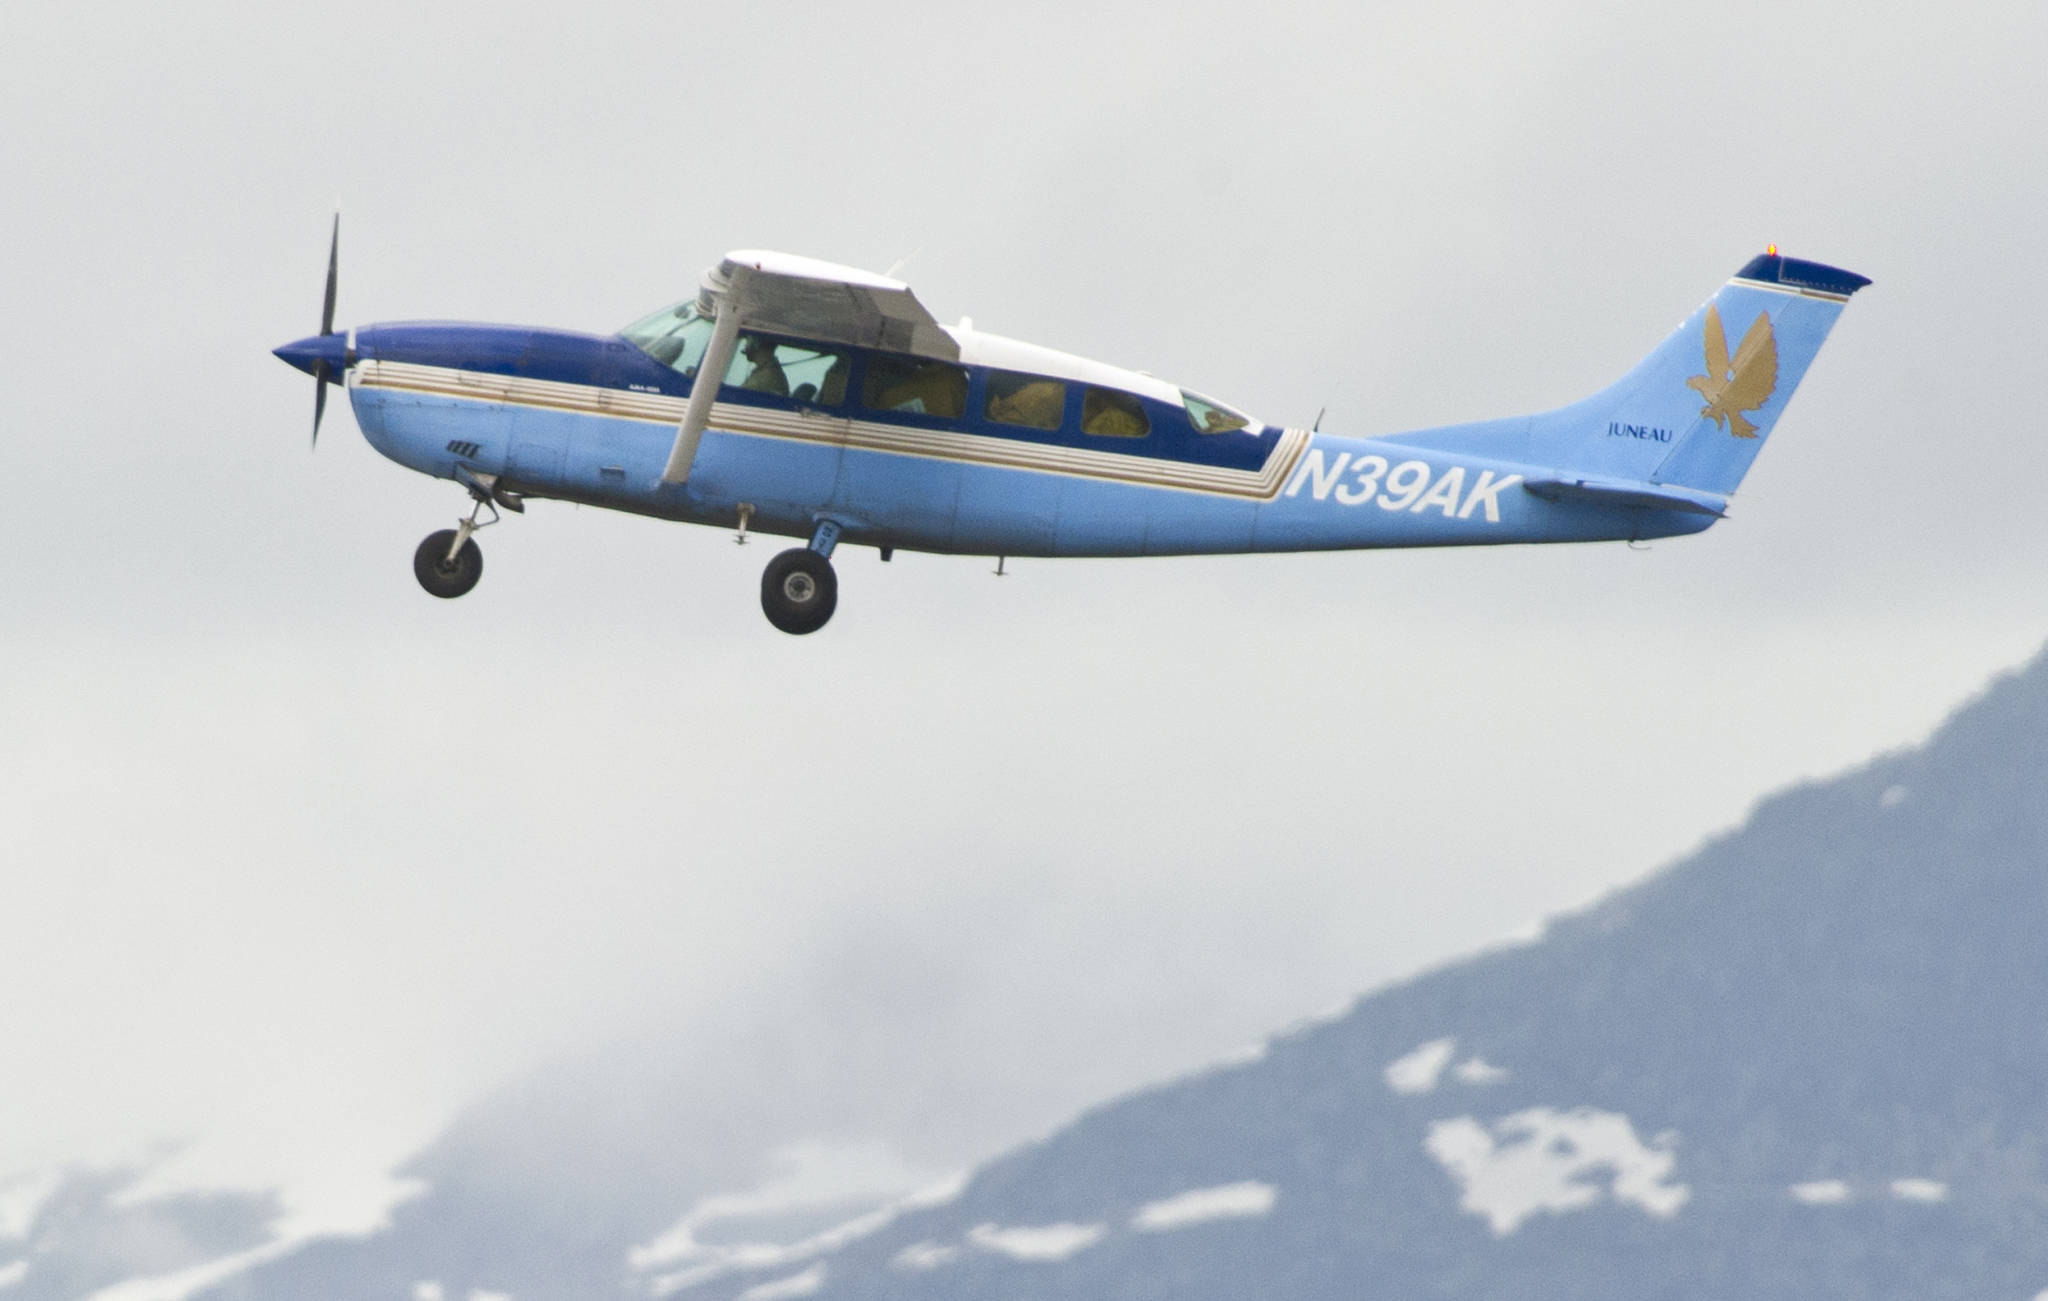 A Wings of Alaska plane takes off from the Juneau International Airport on July 18, 2015. (Michael Penn | Juneau Empire)